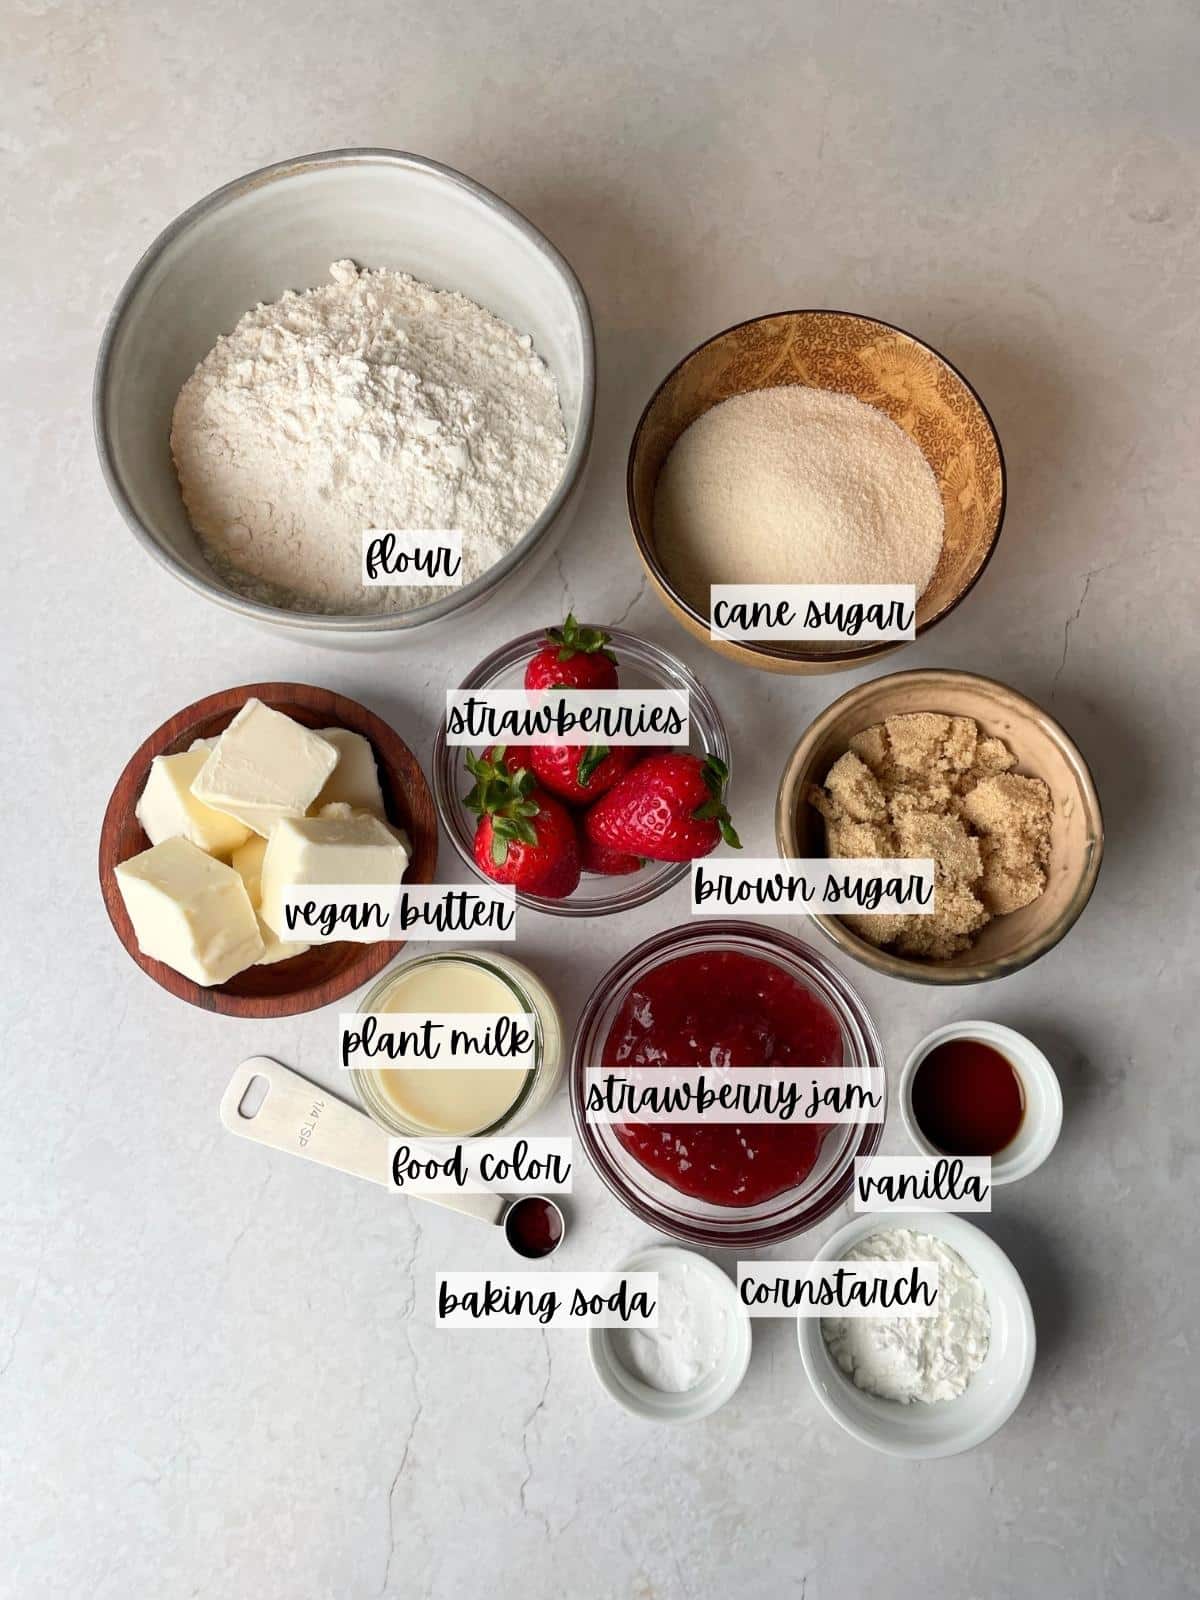 Labeled ingredients for strawberry cookies.